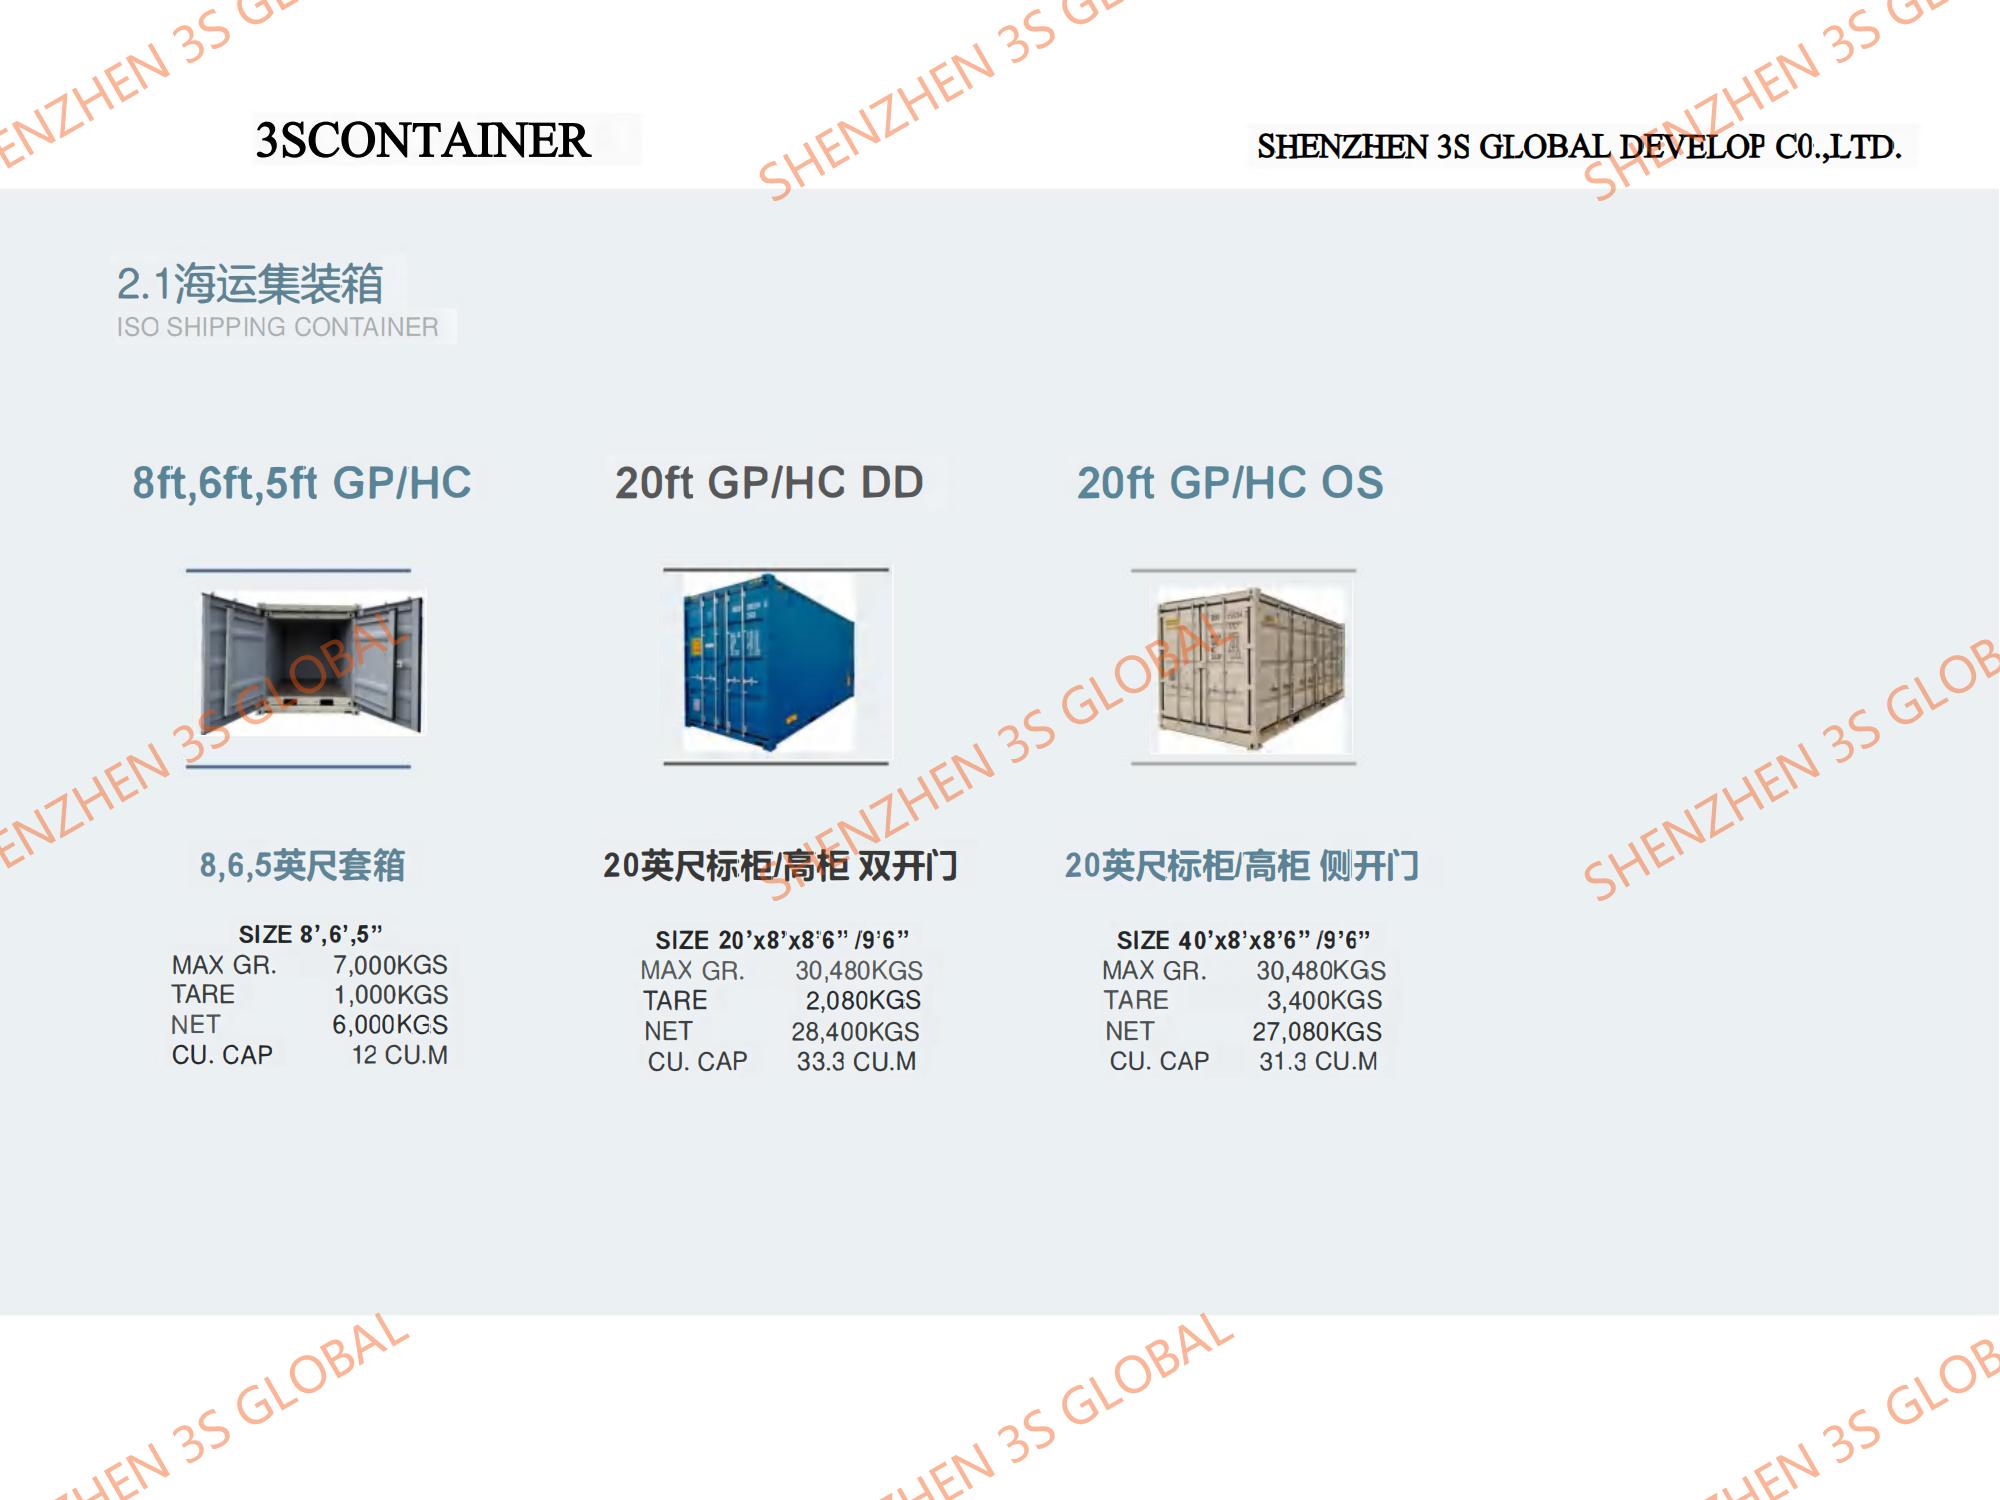 Cargo Shipping Container Manufacturer